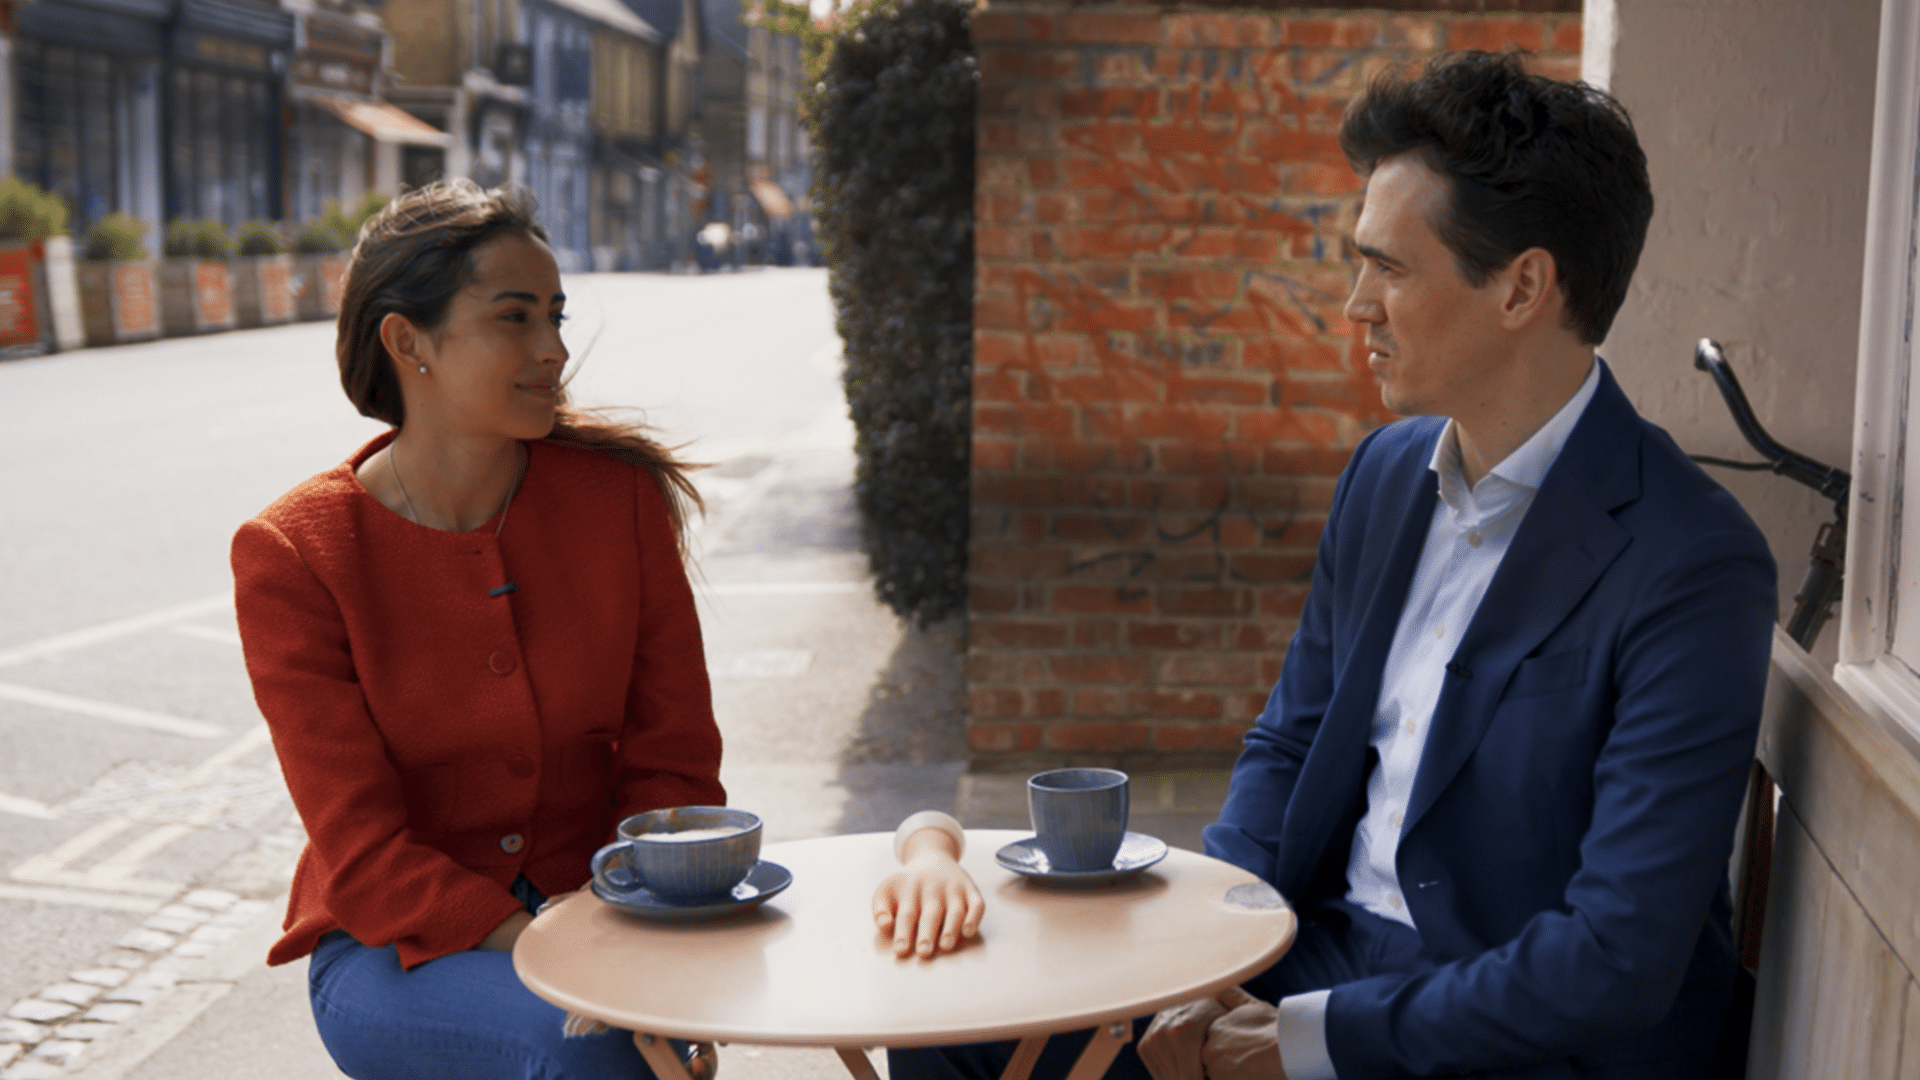 Eugenia and Fabian talk over a cup of coffee. Featured website image for the video "Code-Based Colleagues".